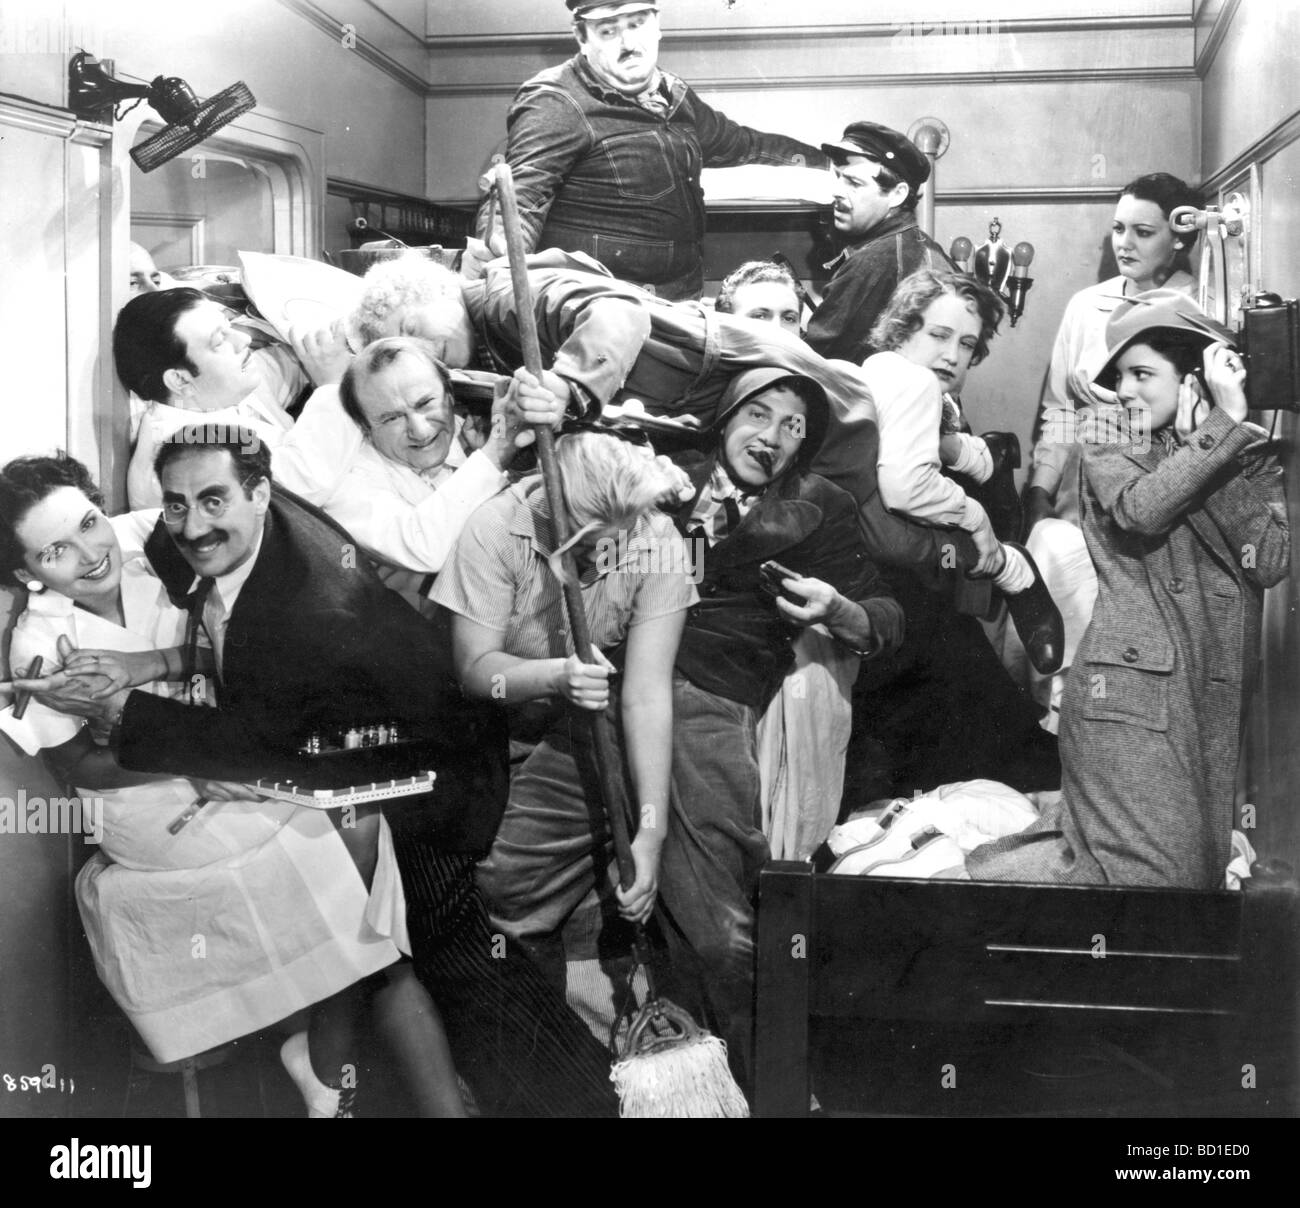 MARX BROTHERS Groucho at left enjoys the crowded lift Stock Photo